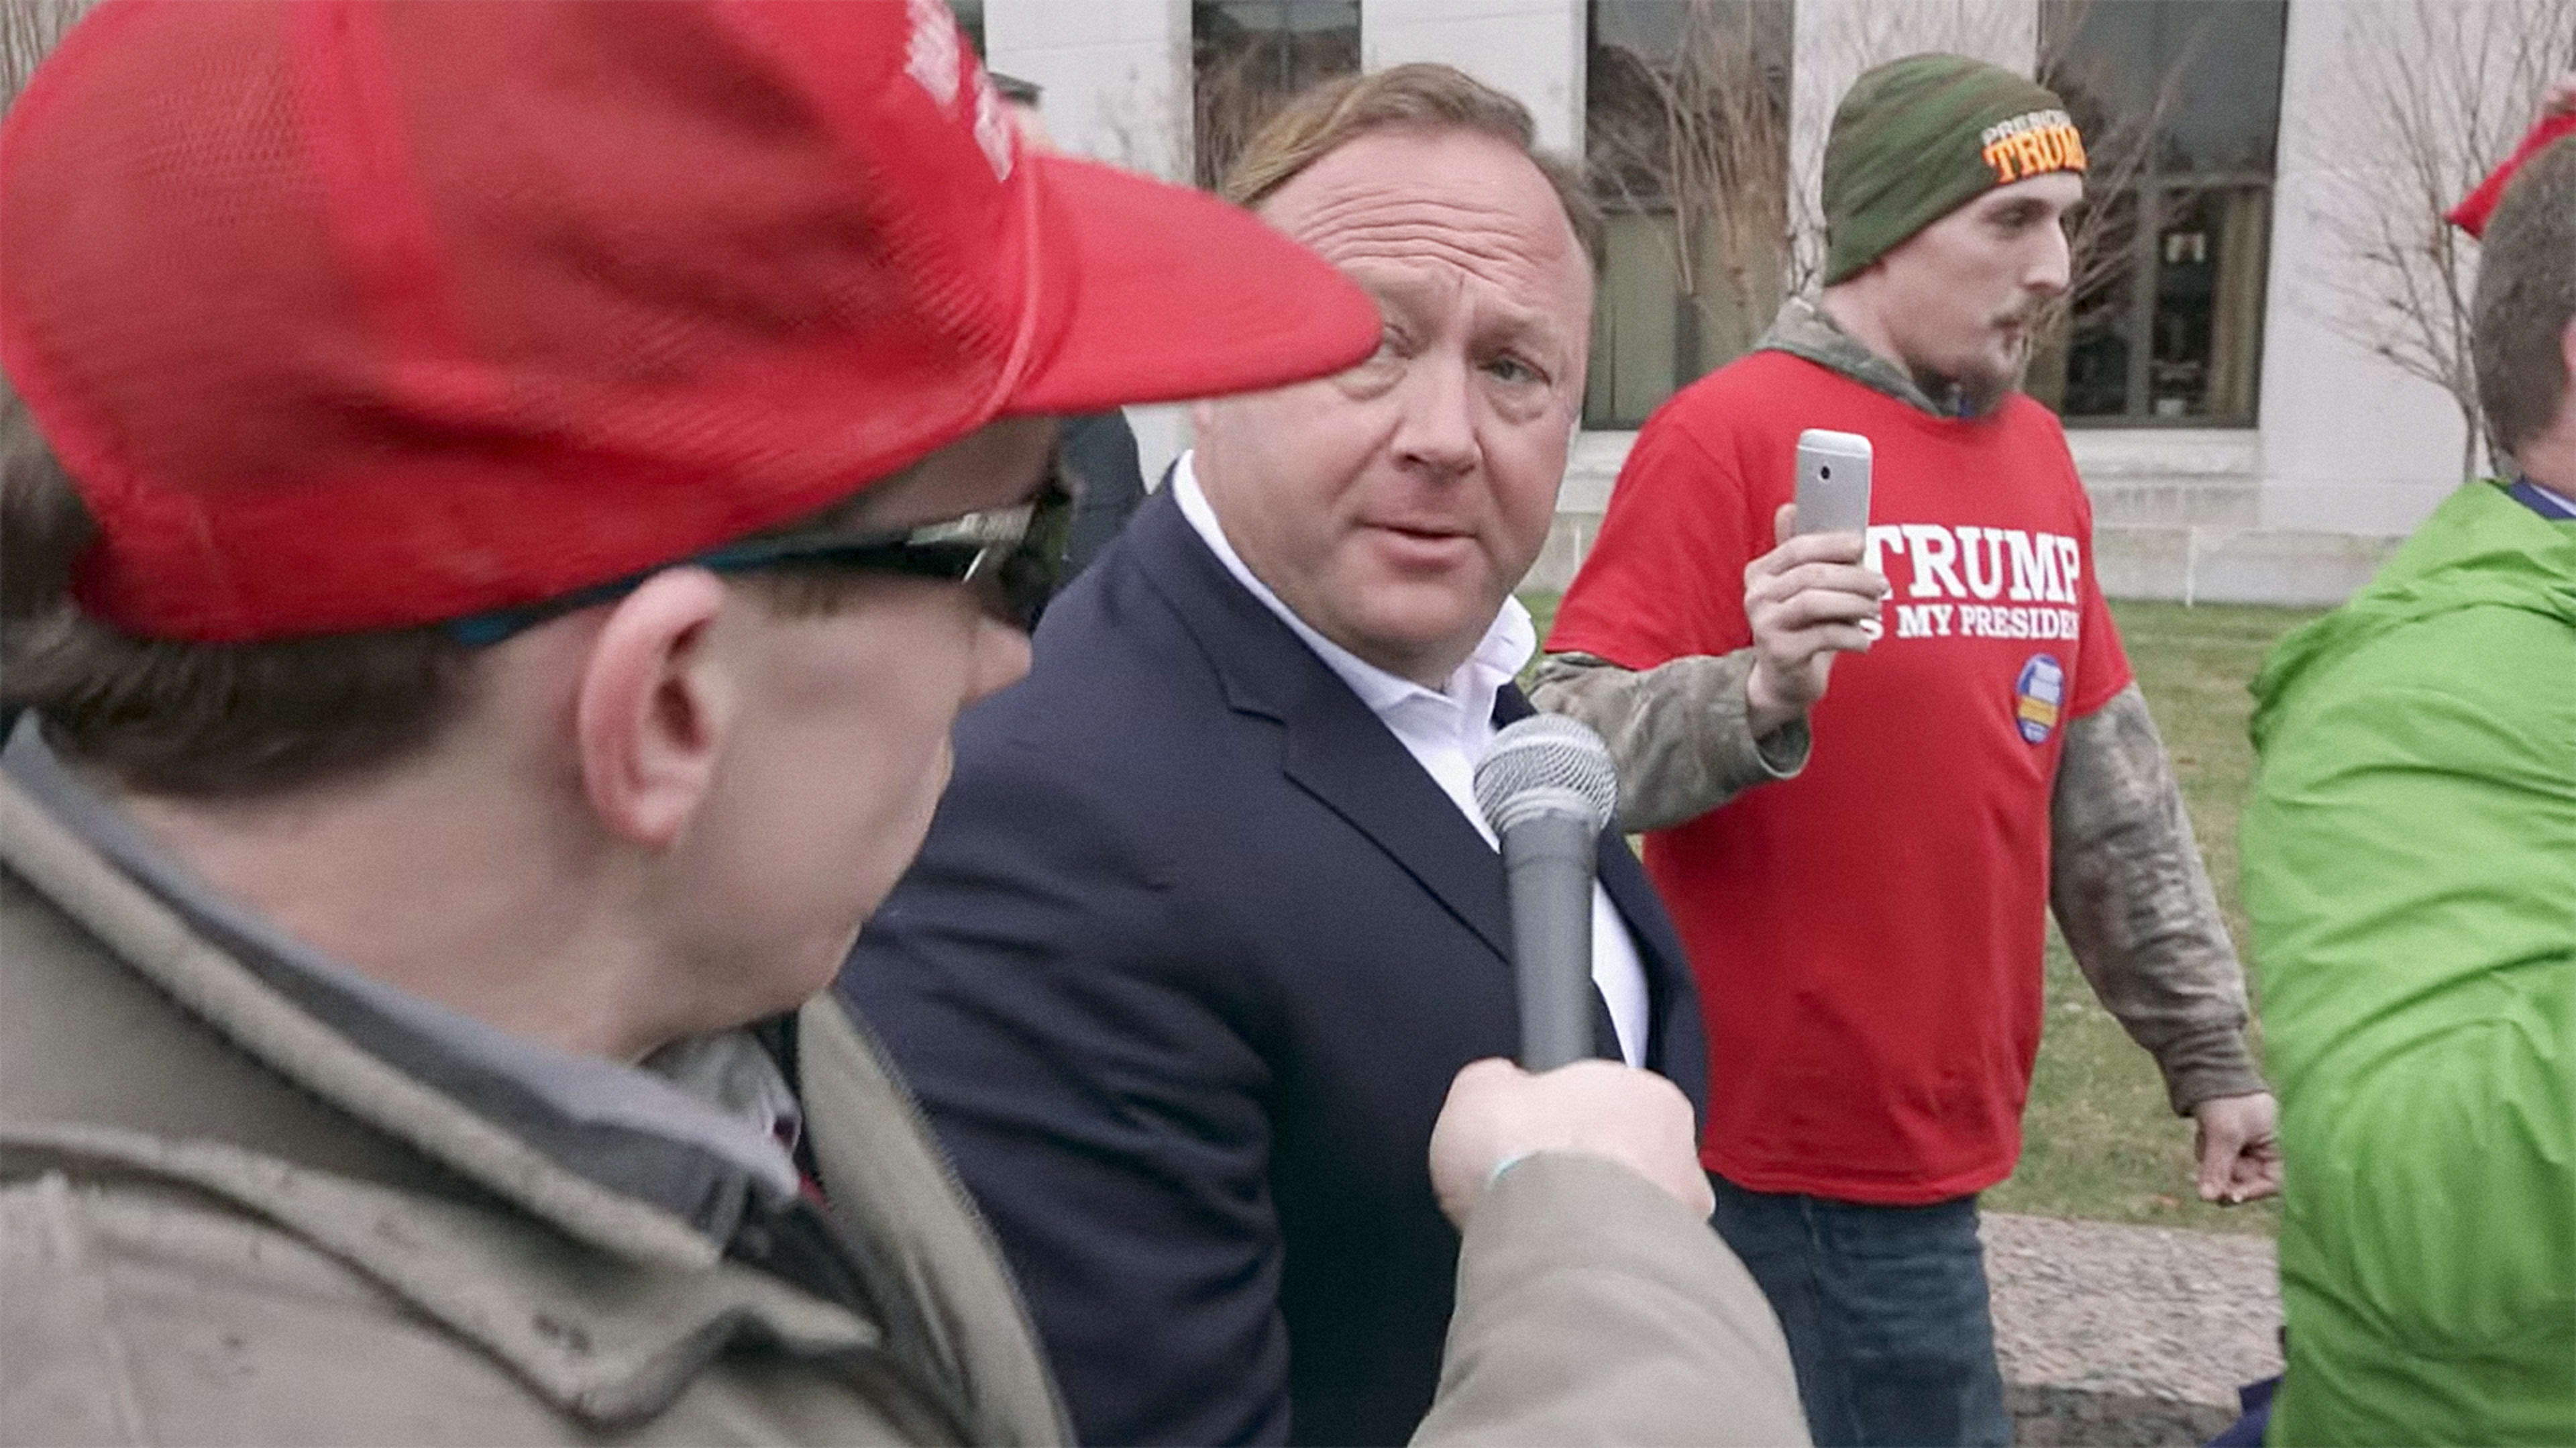 This Mockumentary About Young Trump Superfans Is Great (Again)